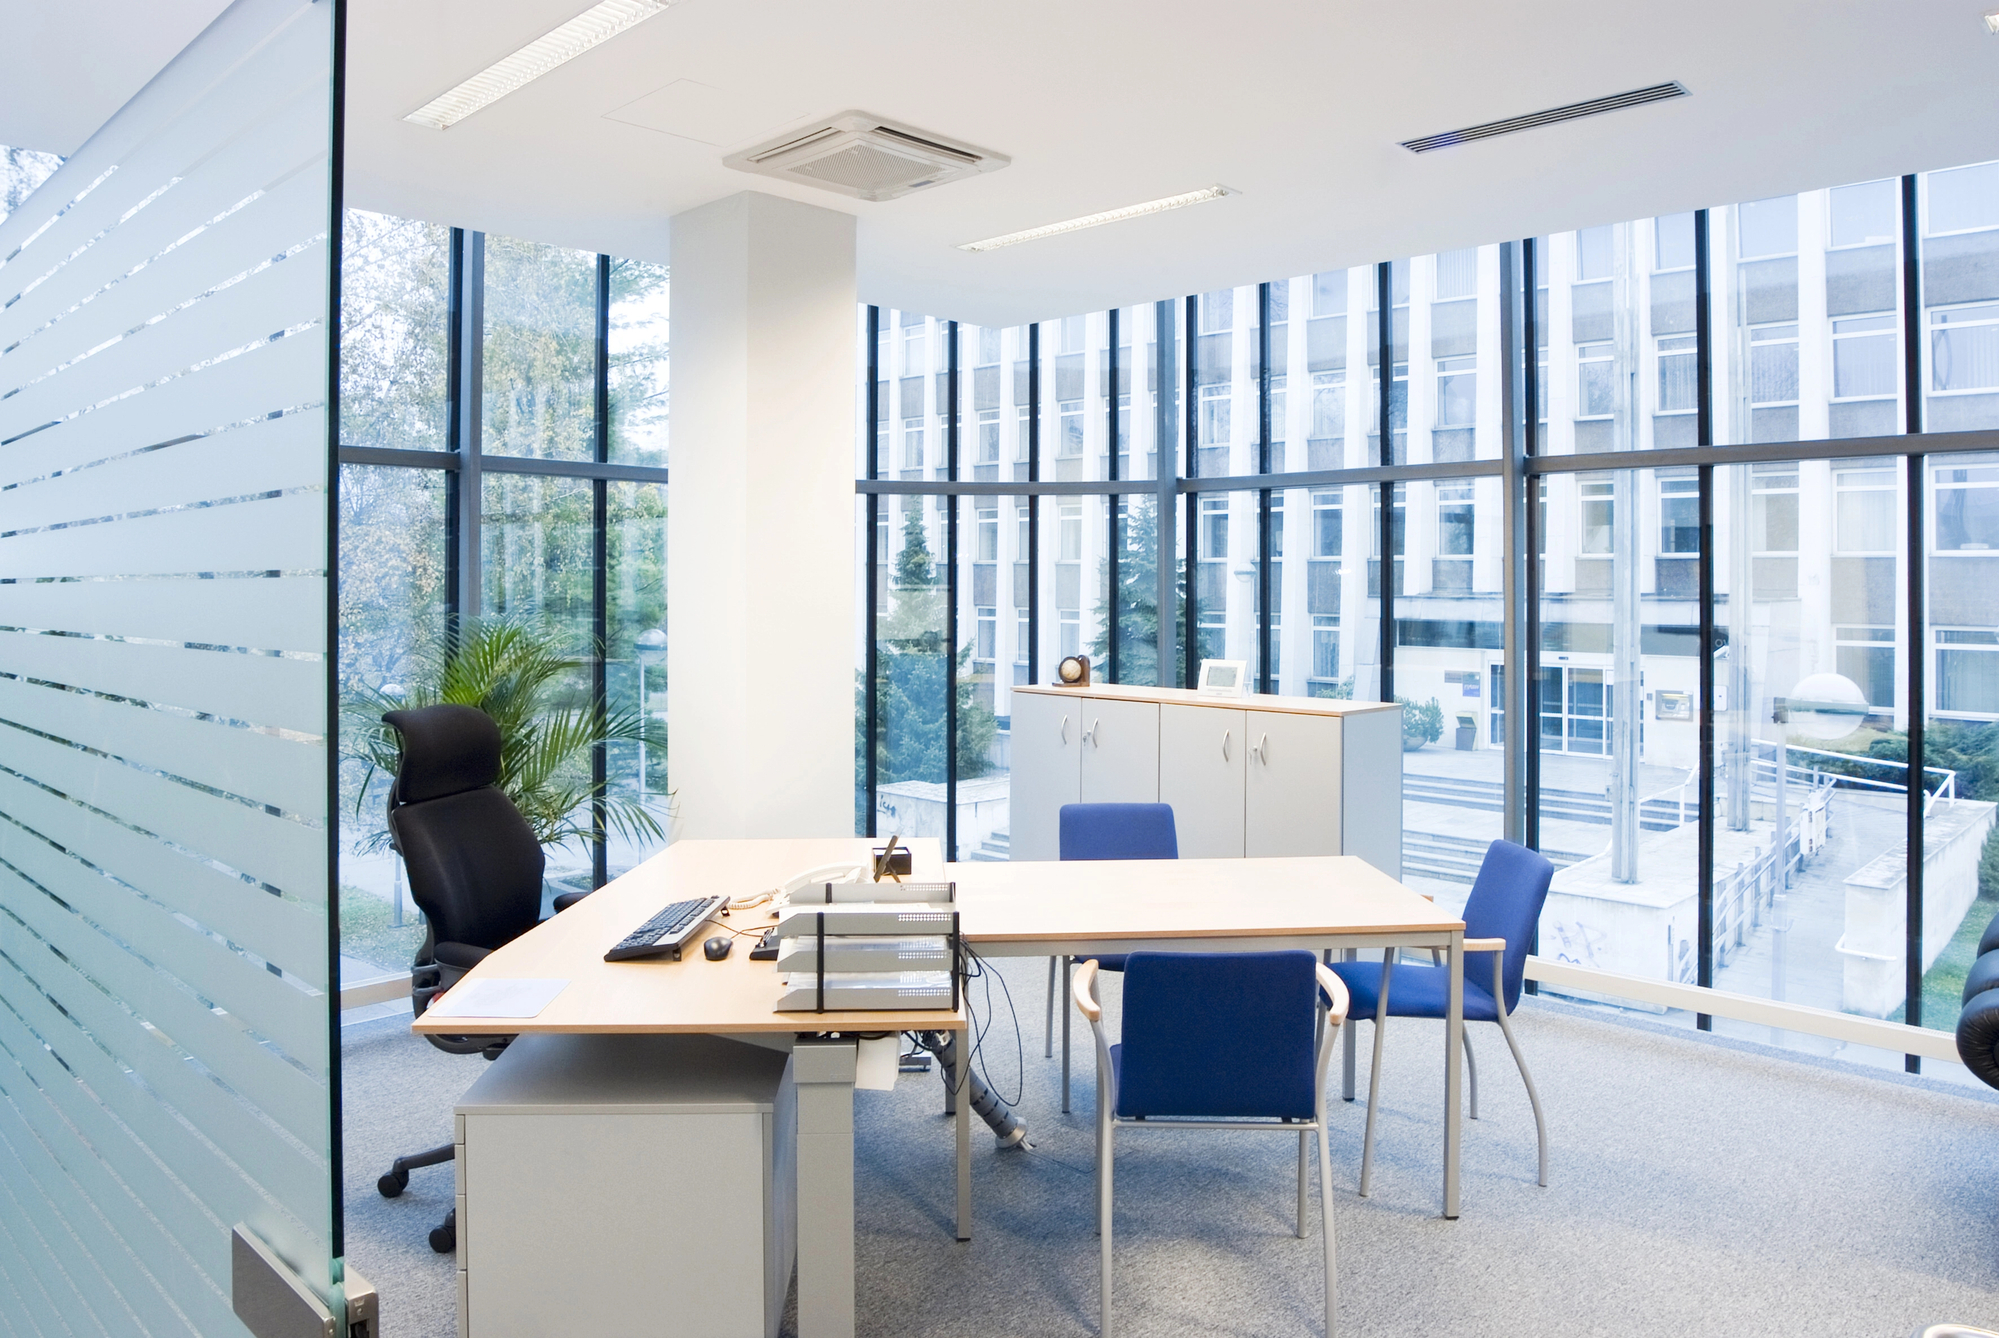 Modern office space with large windows showing smart window tint technology and minimalist furniture